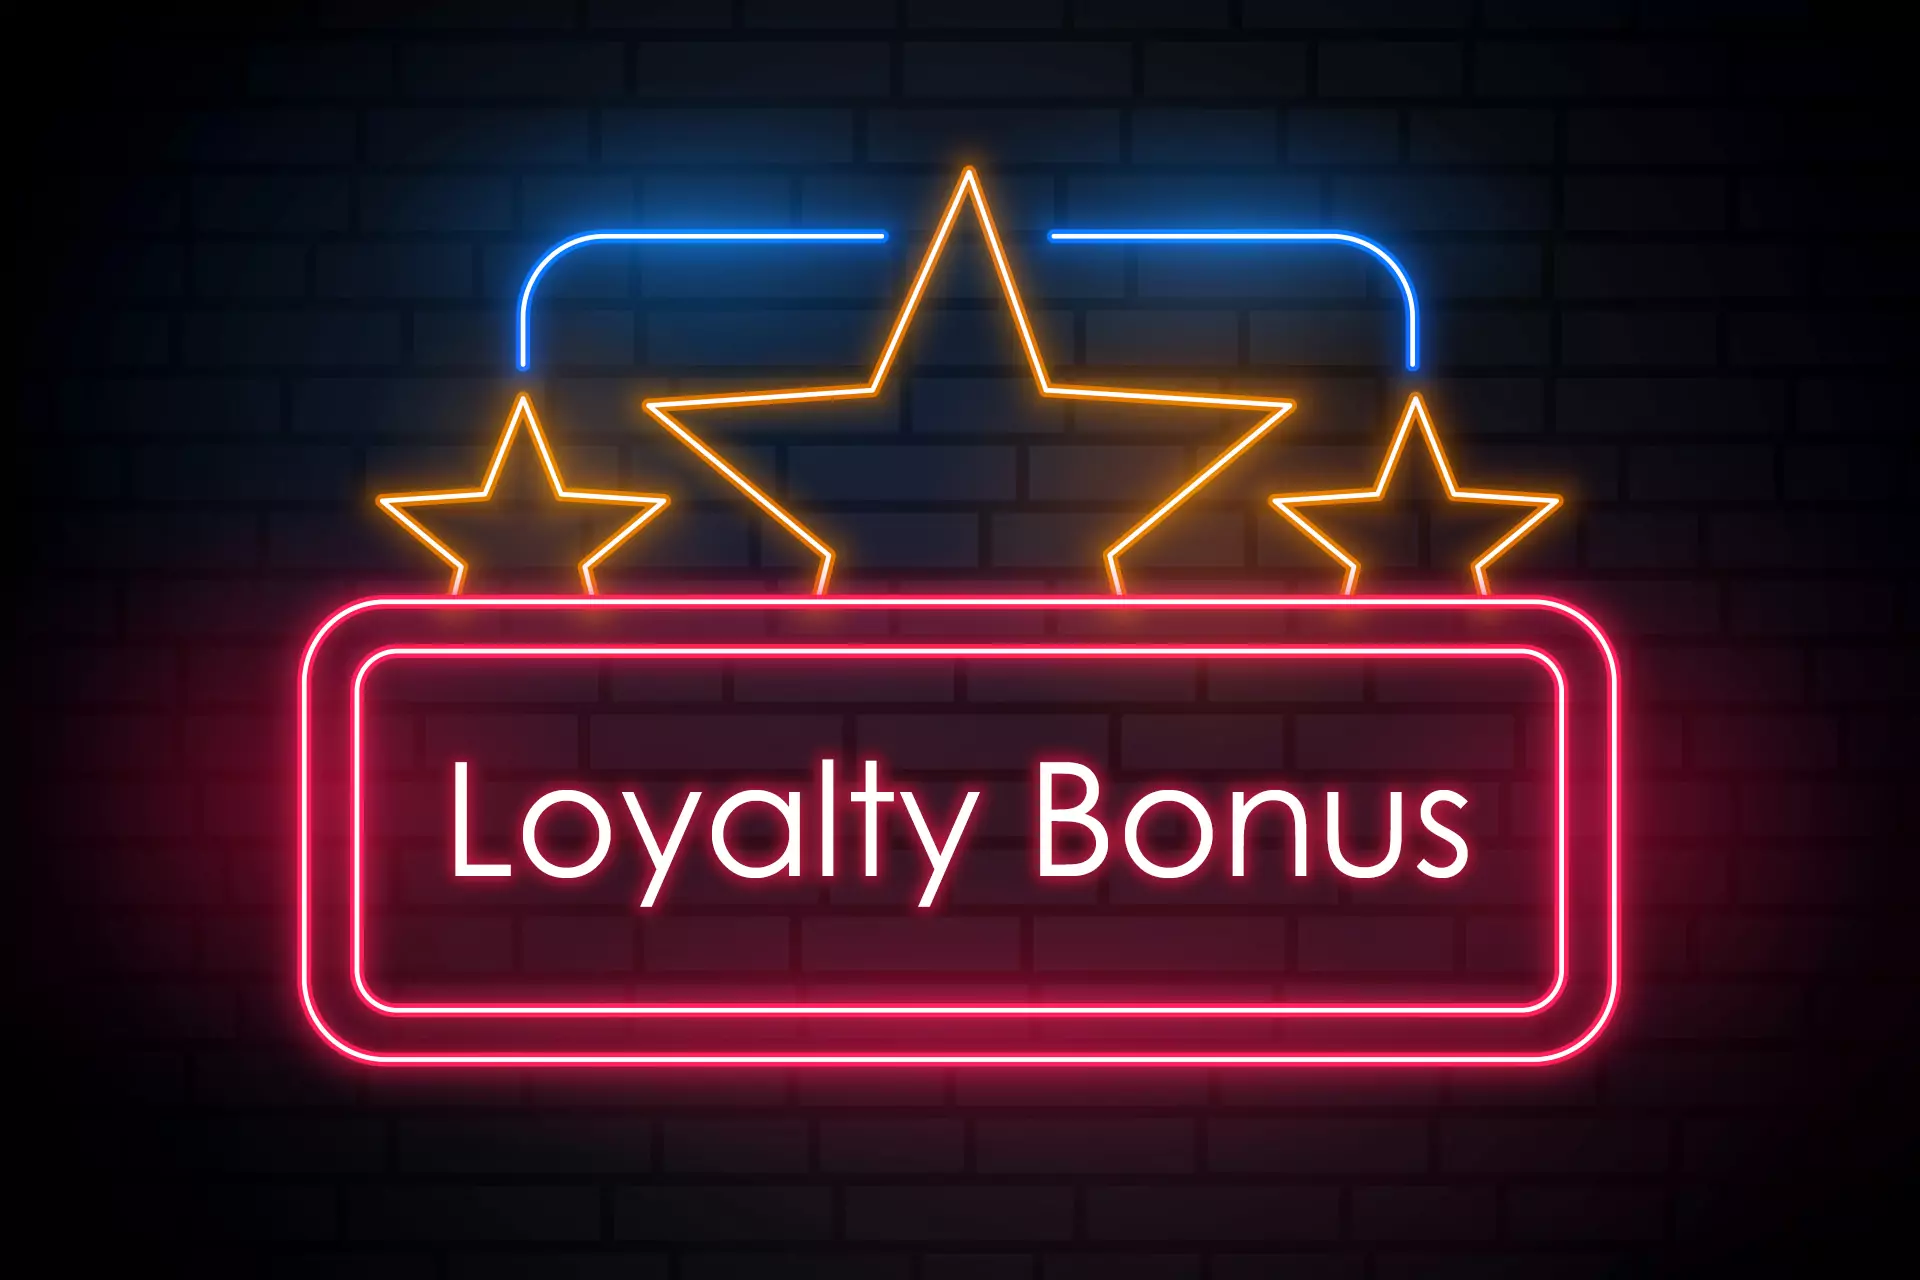 Online casinos appreciate their constant users and improve their loyalty programs.